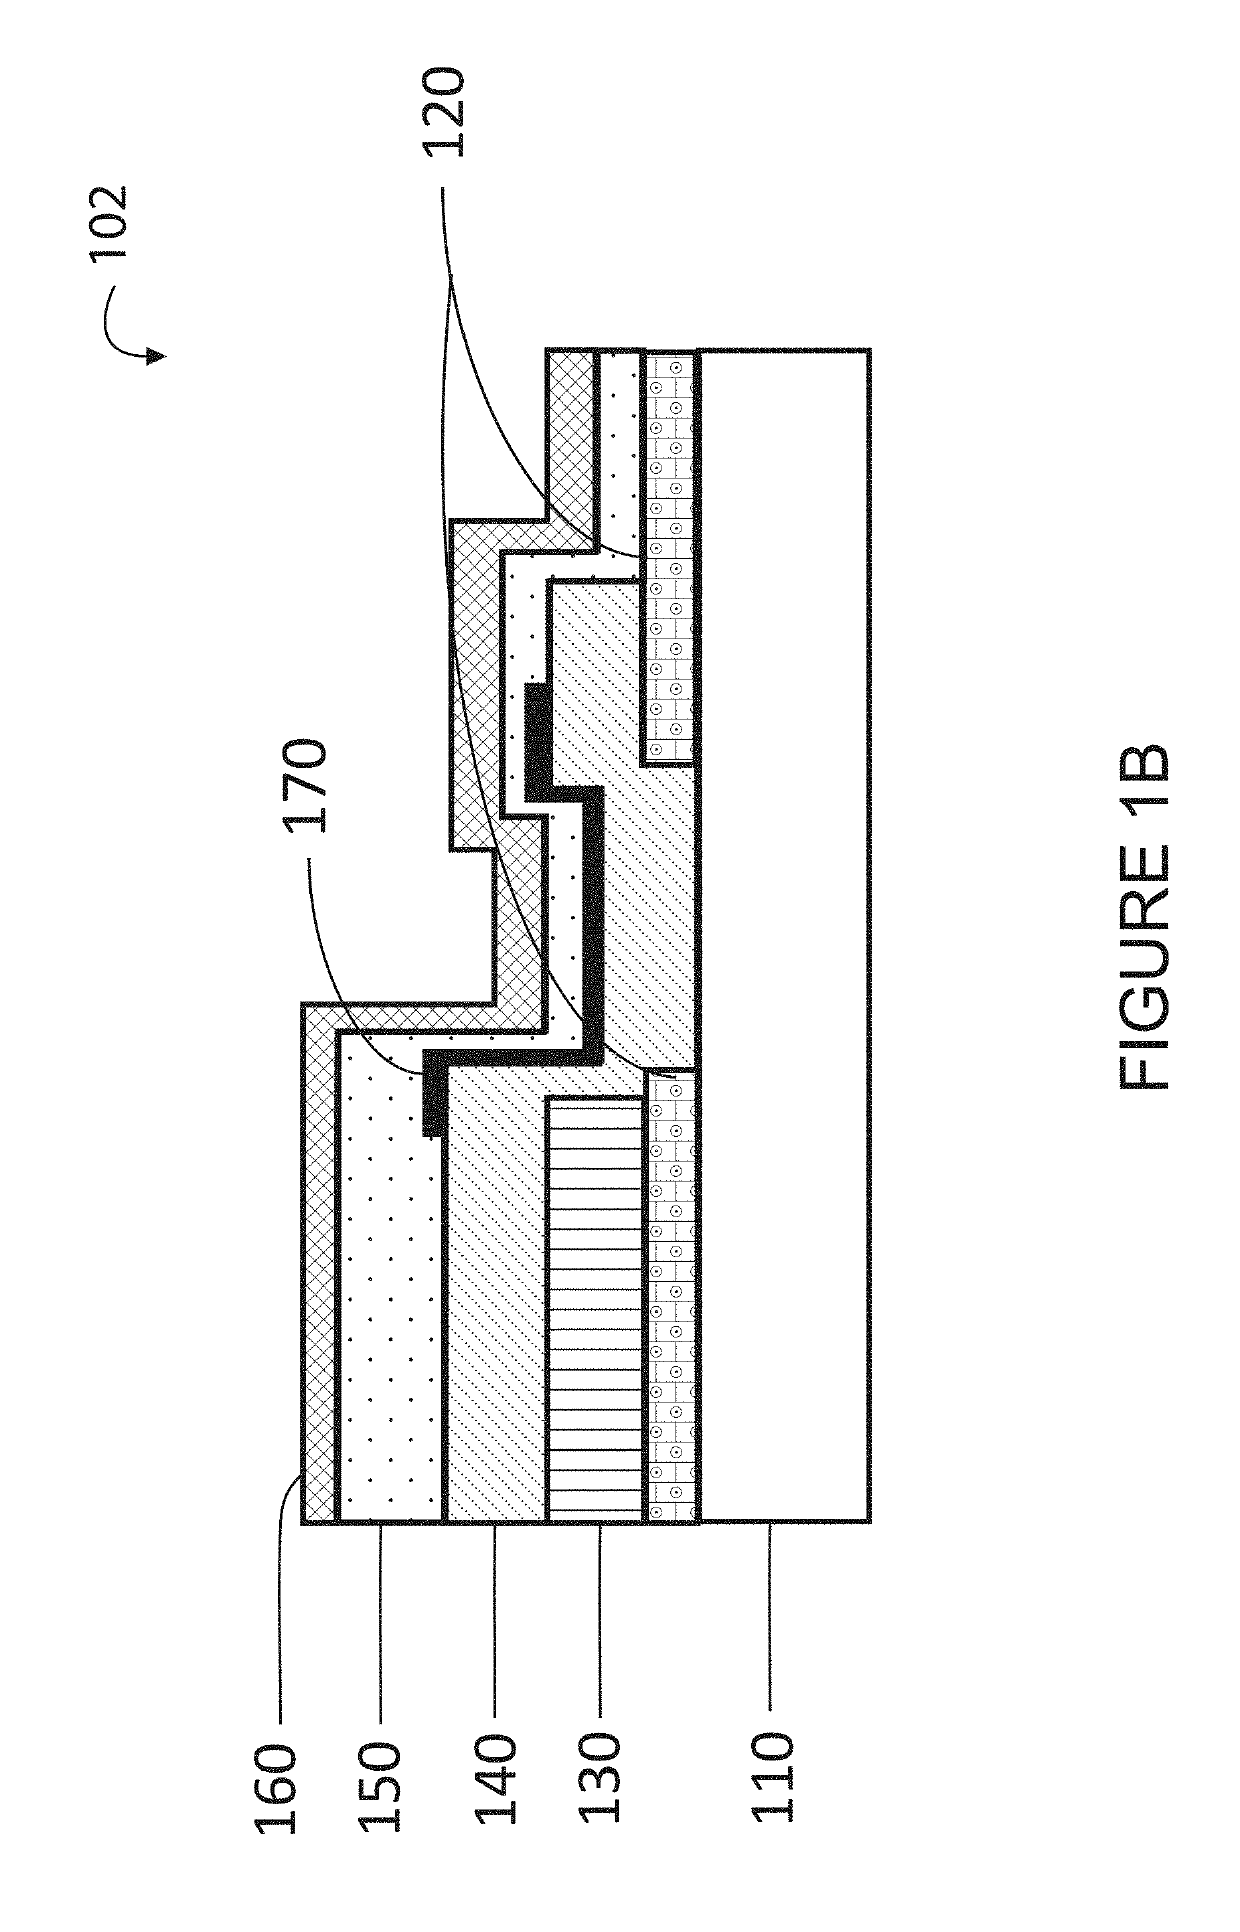 Multiple active and inter layers in a solid-state device